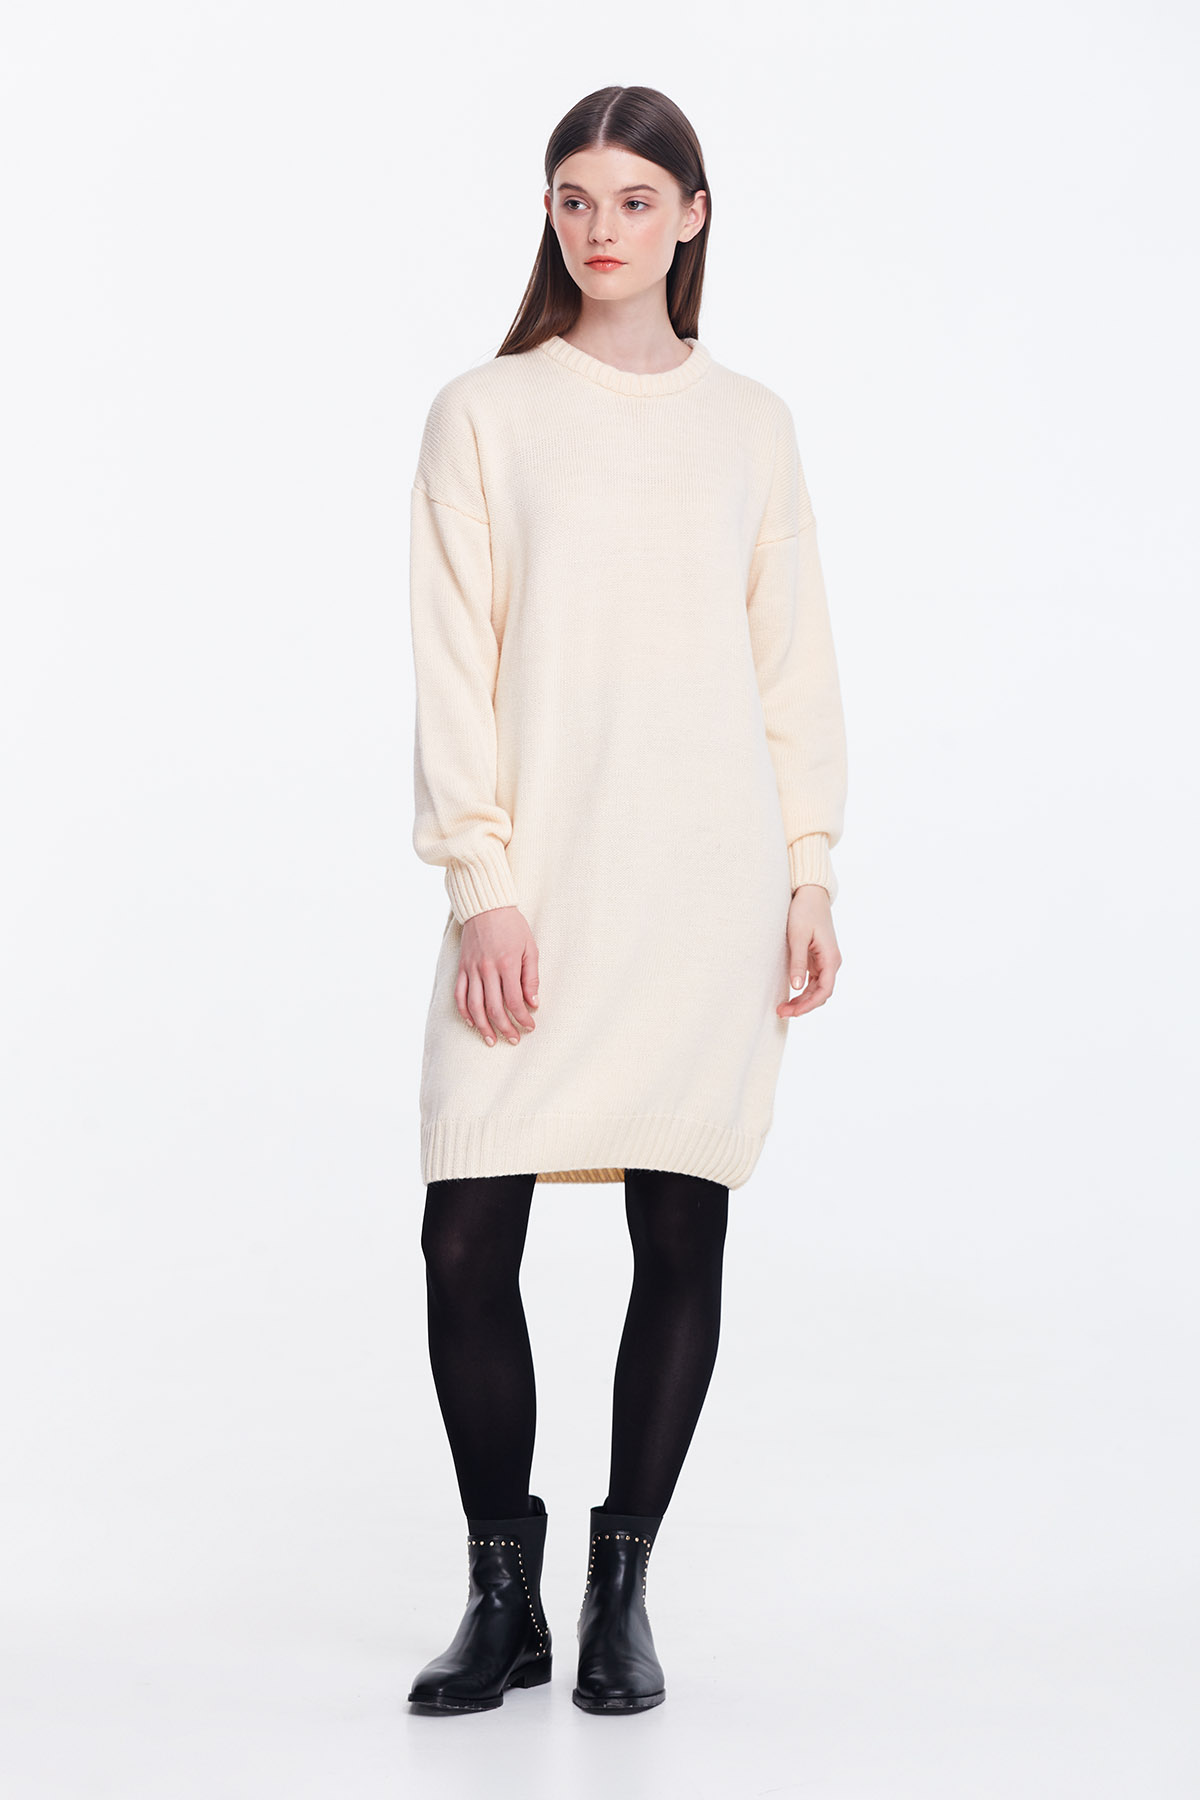 Loose-fitting milky knit dress , photo 5